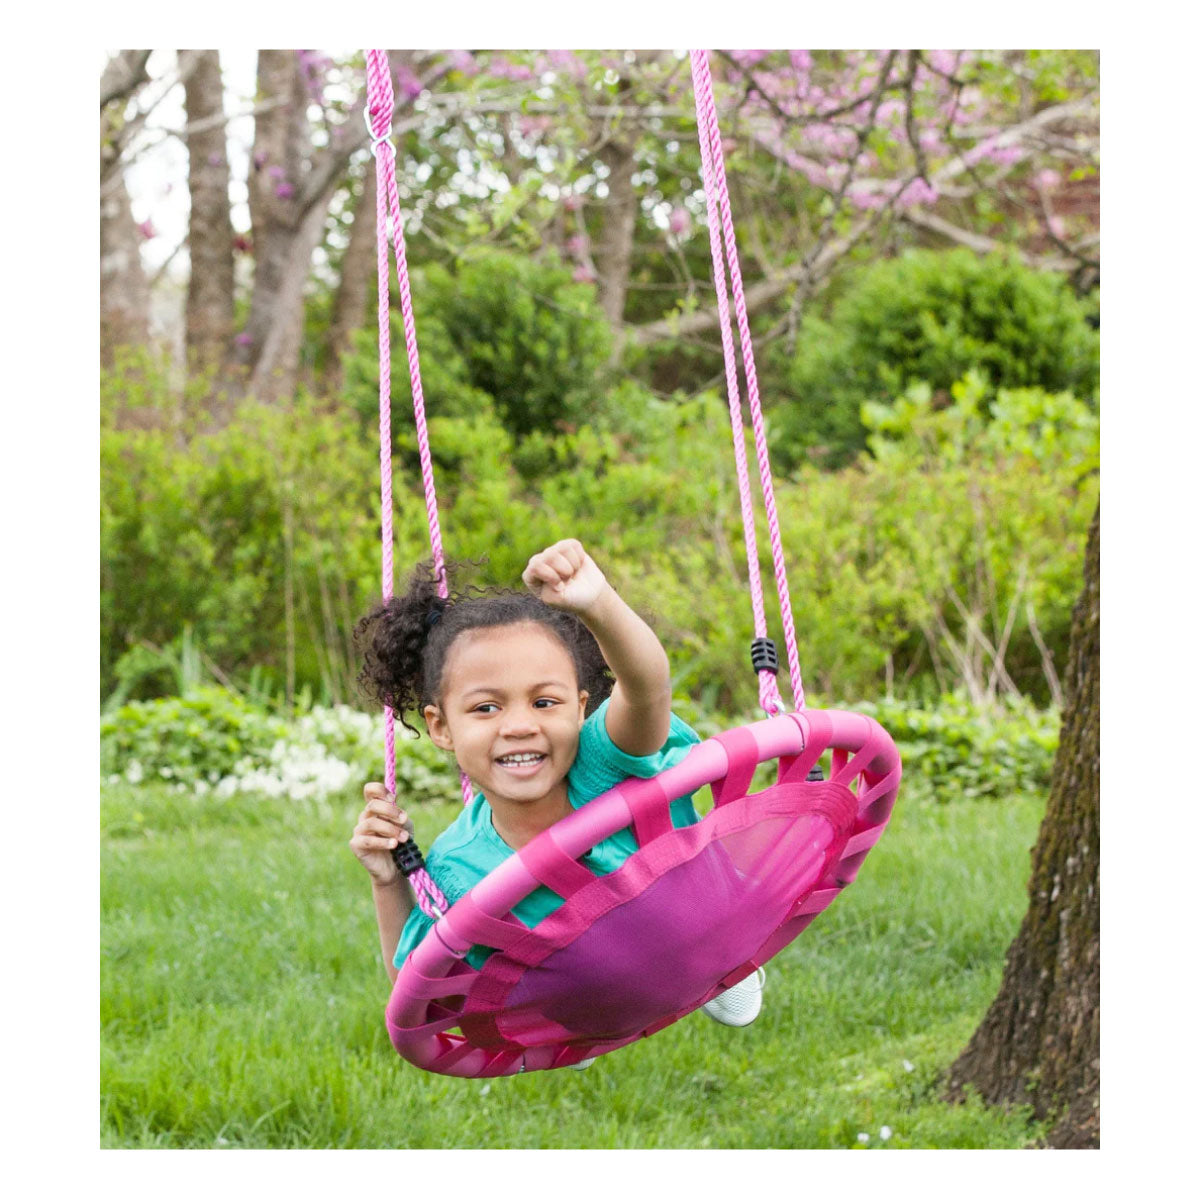 Hearthsong 24-Inch ColorBurst Round Swing